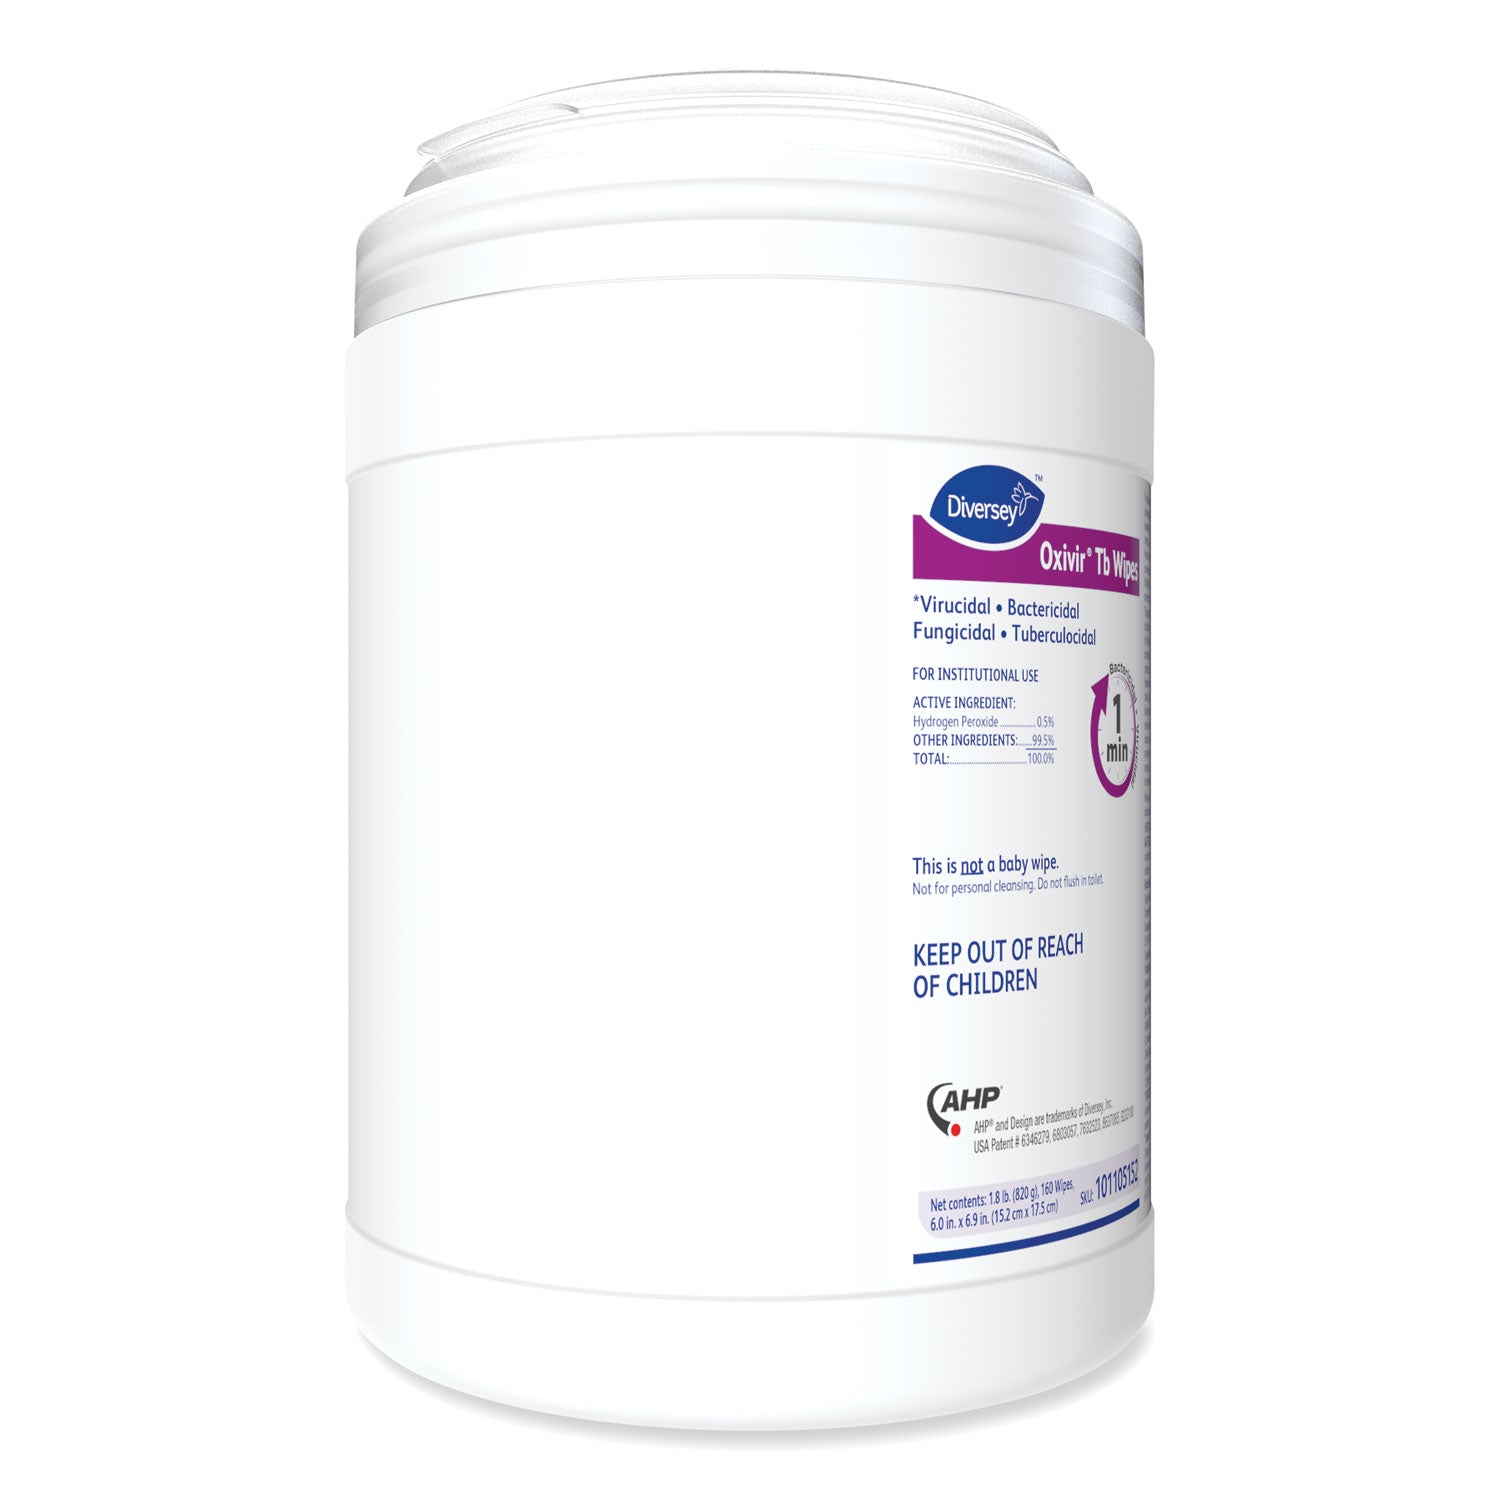 oxivir-tb-disinfectant-wipes-6-x-69-characteristic-scent-white-160-canister-4-canisters-carton_dvo101105152 - 4